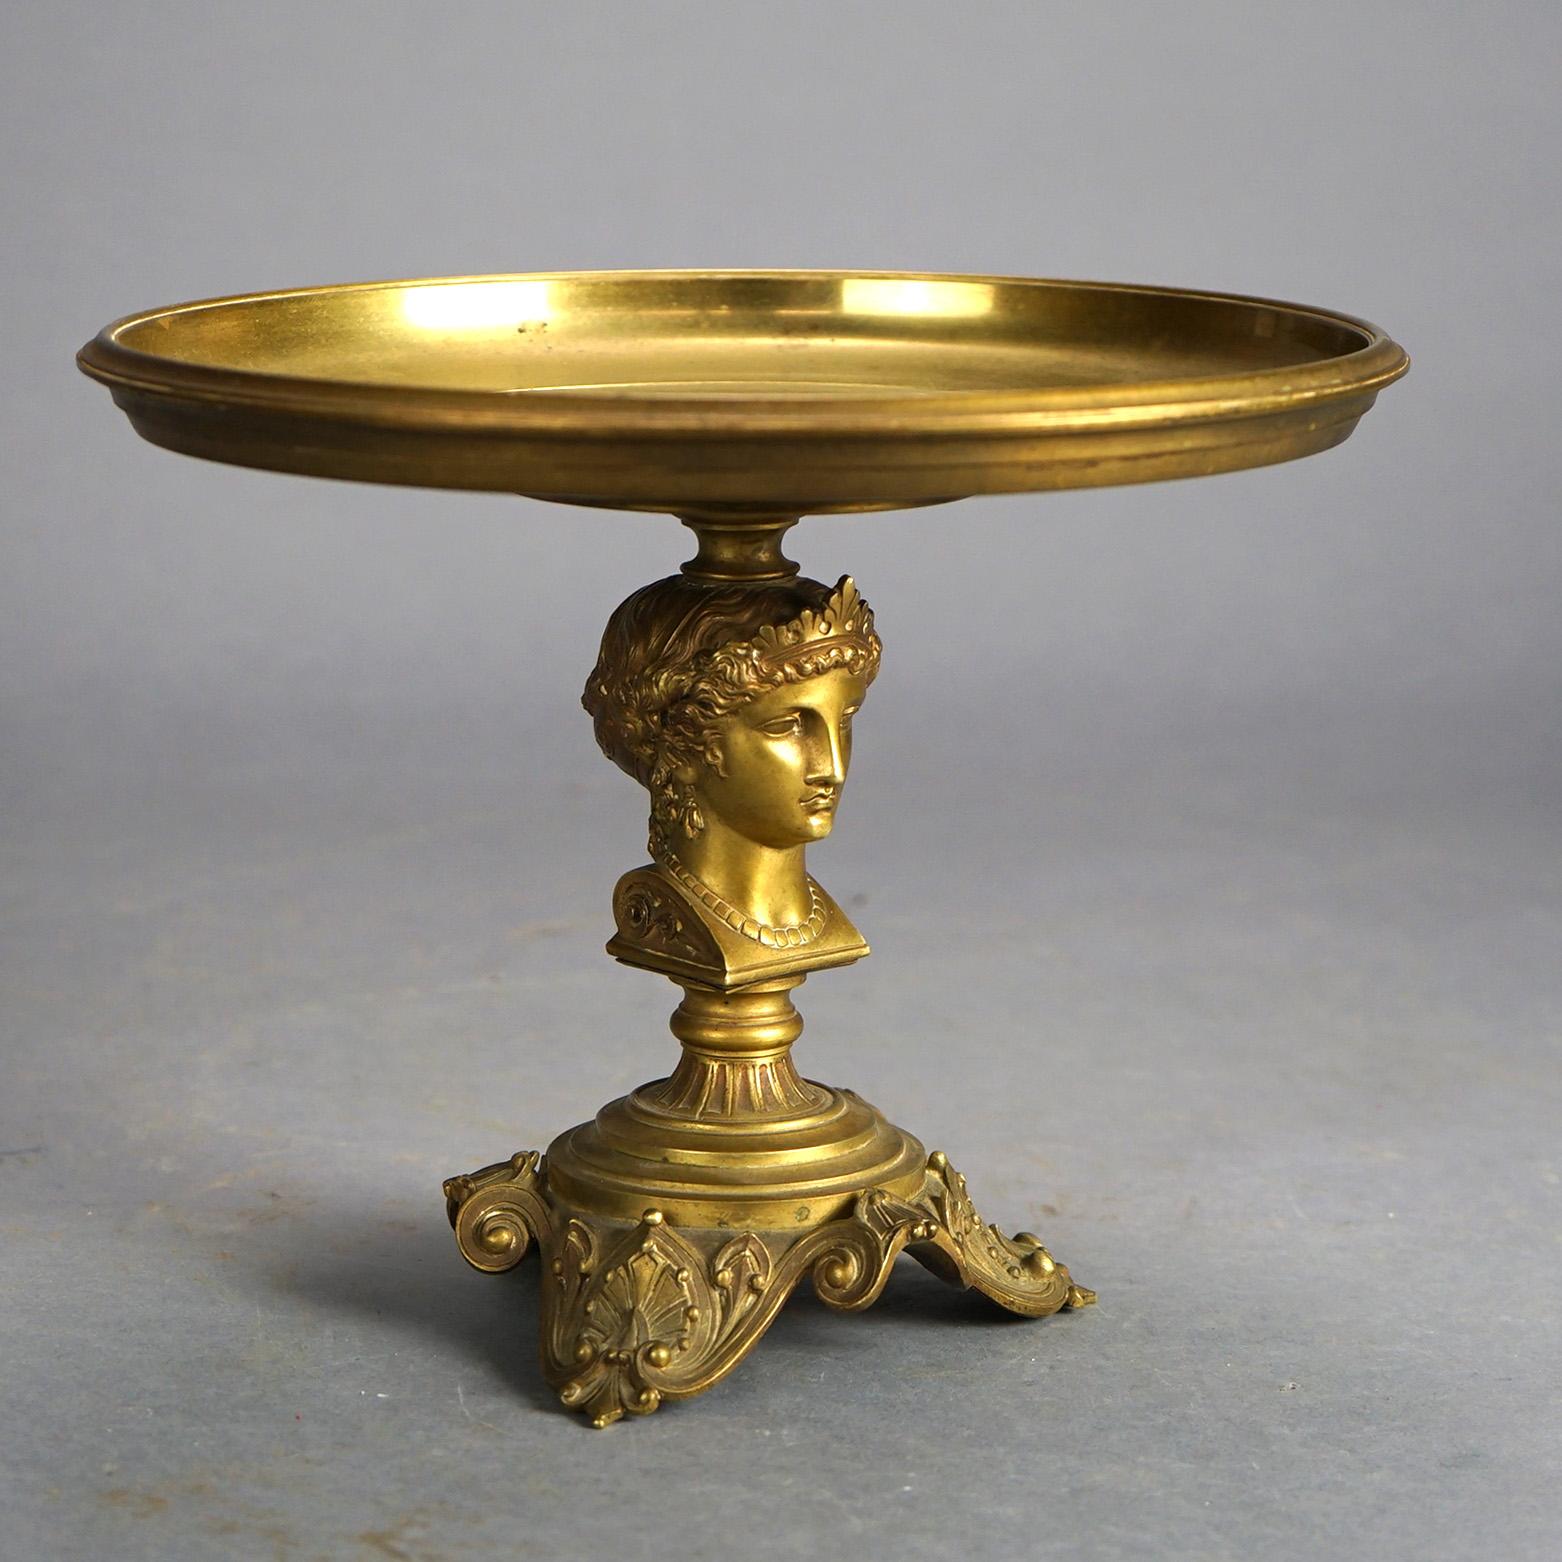 Antique Neoclassical tazza offers cast bronze construction with tray over figural woman column raised on foliate embossed feet, 19thC

Measures- 8.5''H x 10.75''W x 10.75''D